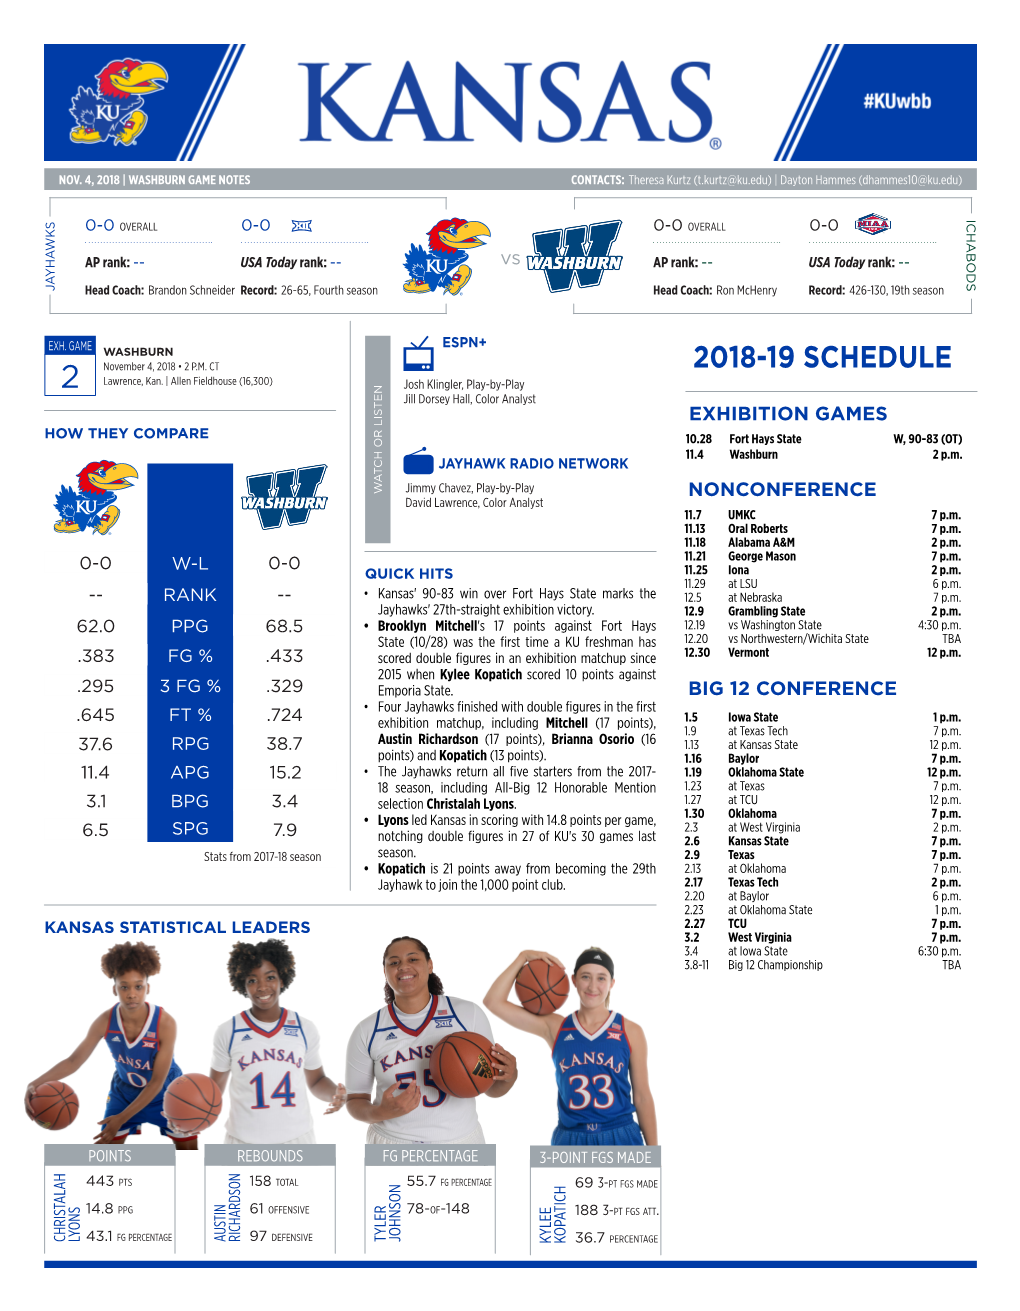 2018-19 SCHEDULE 2 Lawrence, Kan